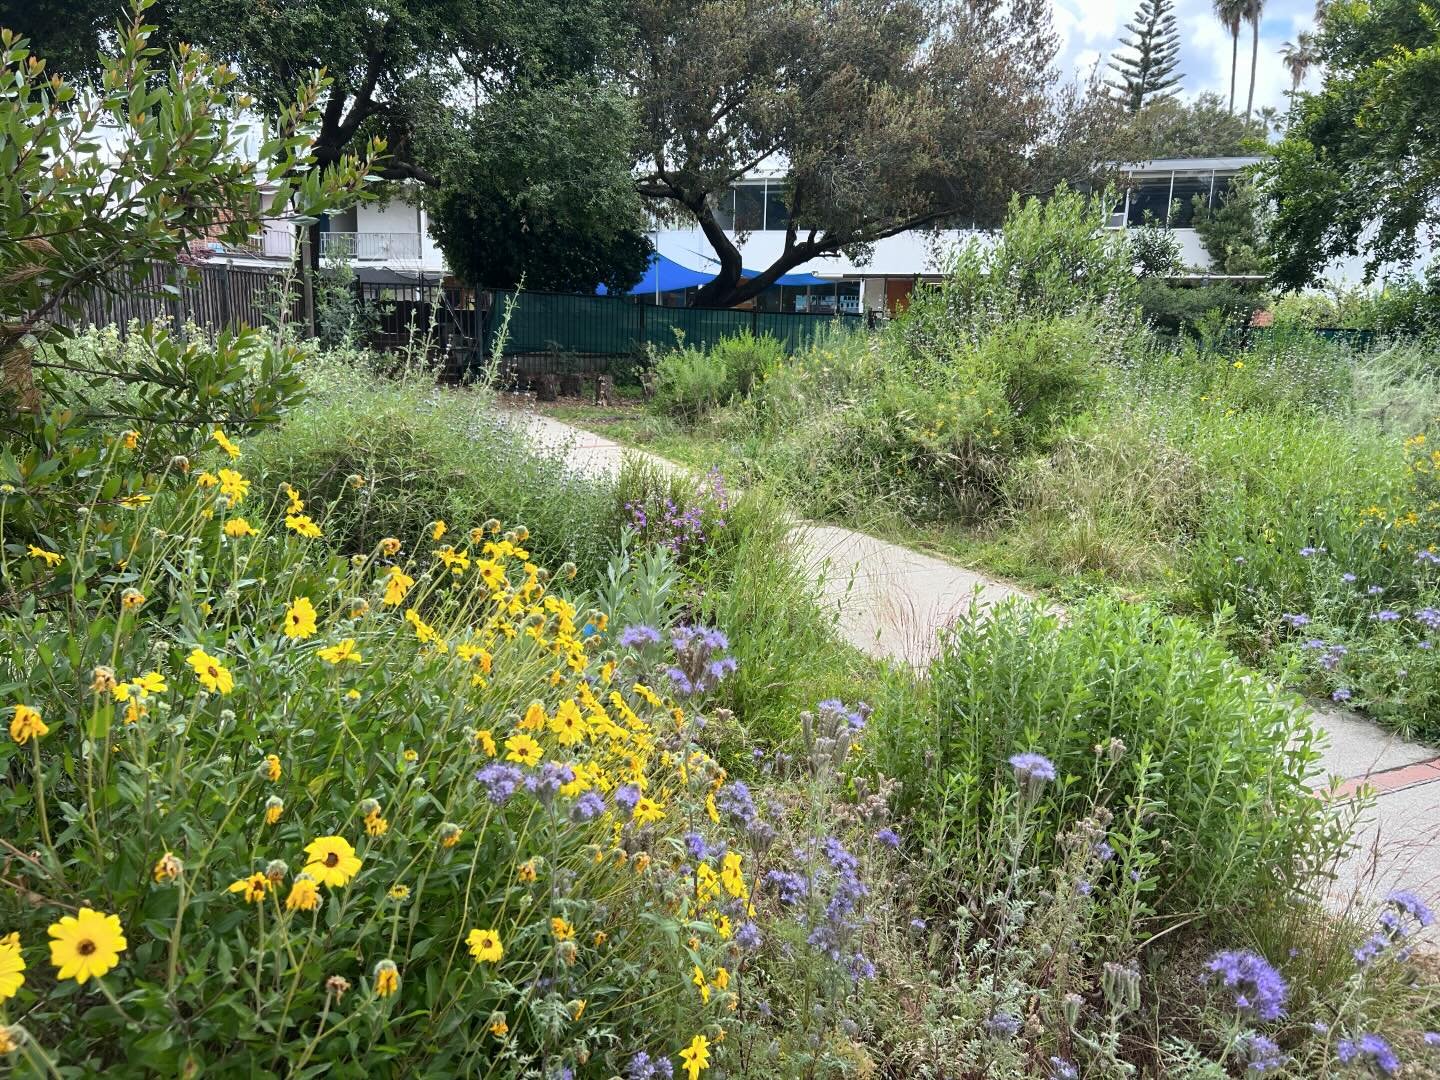 State of Things at ERPC Native Garden:
.
.
.
In a word: lush. The wet winter has nearly doubled the density of this chaparral garden. Everything is embarrassingly voluminous, and certainly in need of some intervention.  But for now, just know that th